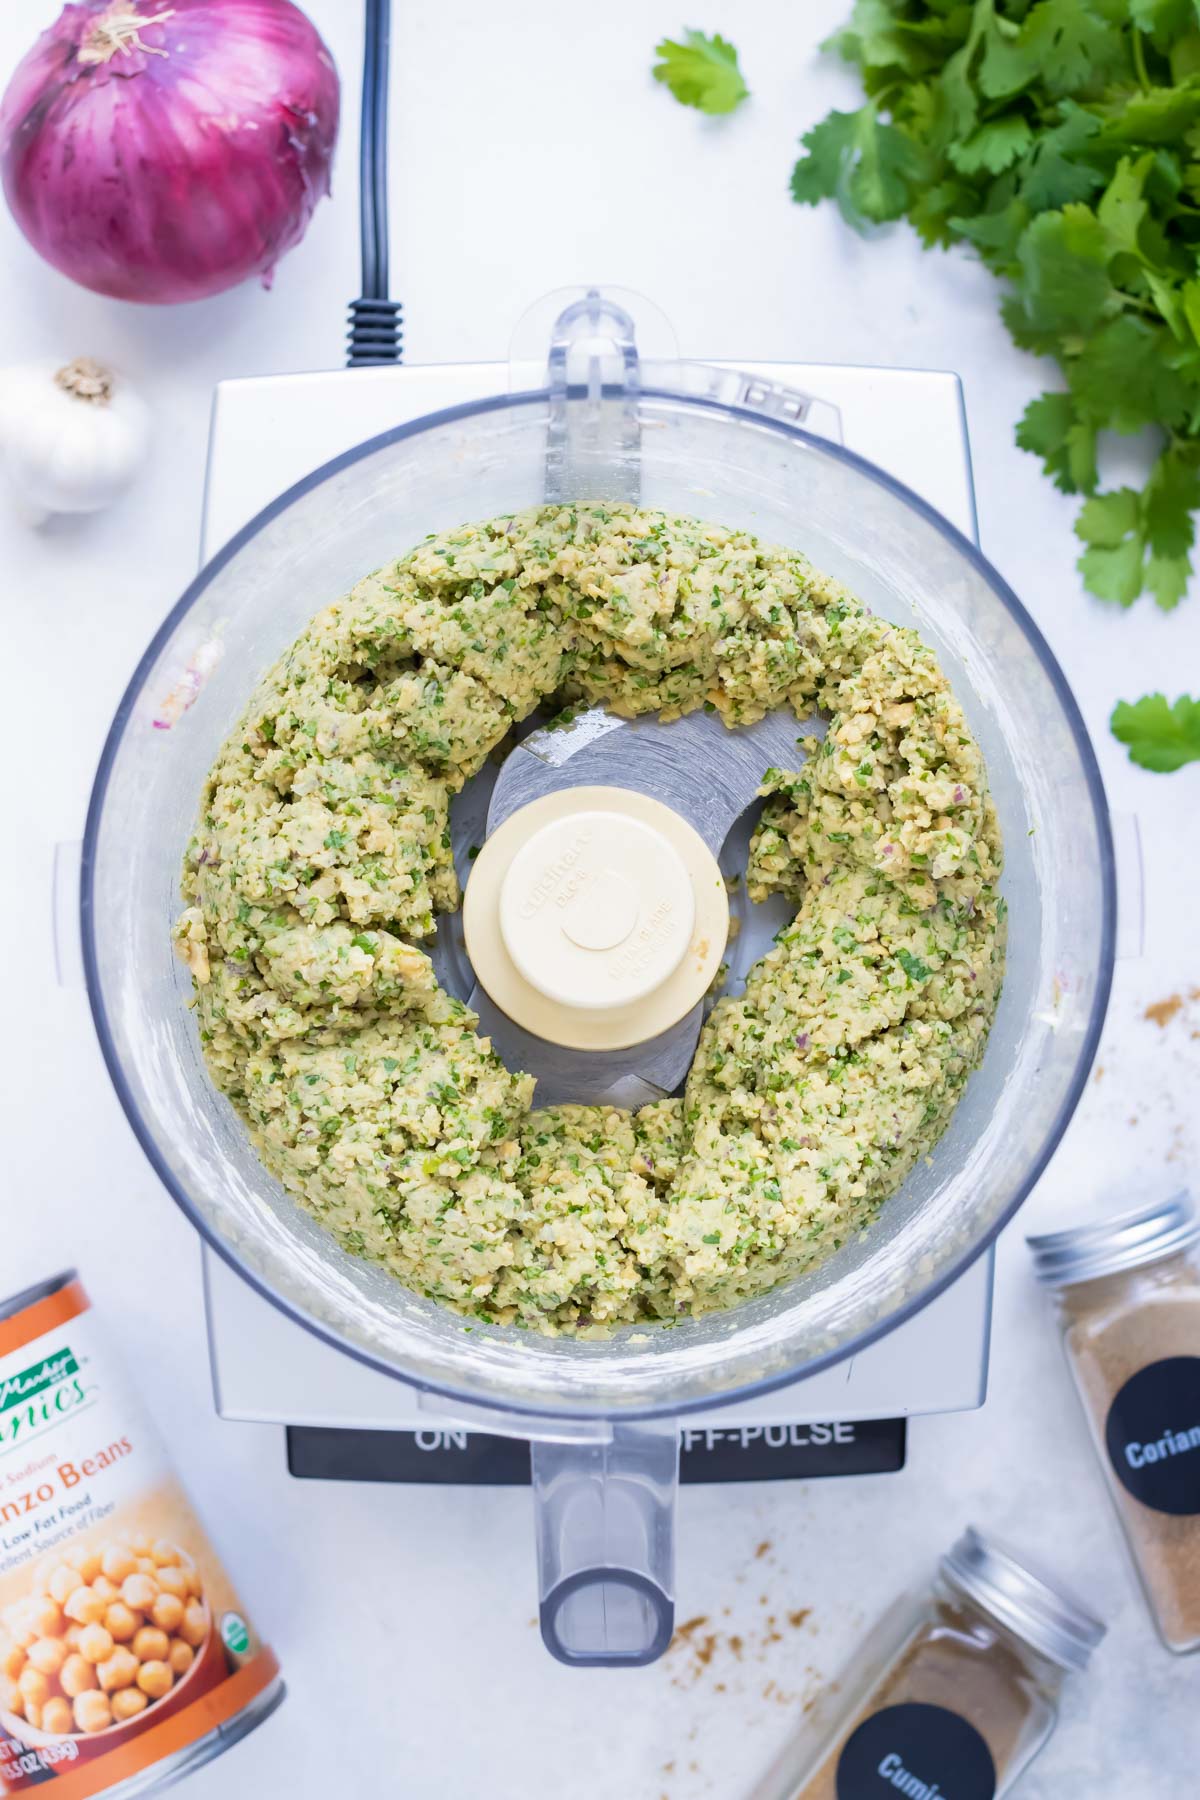 Pulse the ingredients 30-40 times to complete incorporate the ingredients in this falafel recipe.